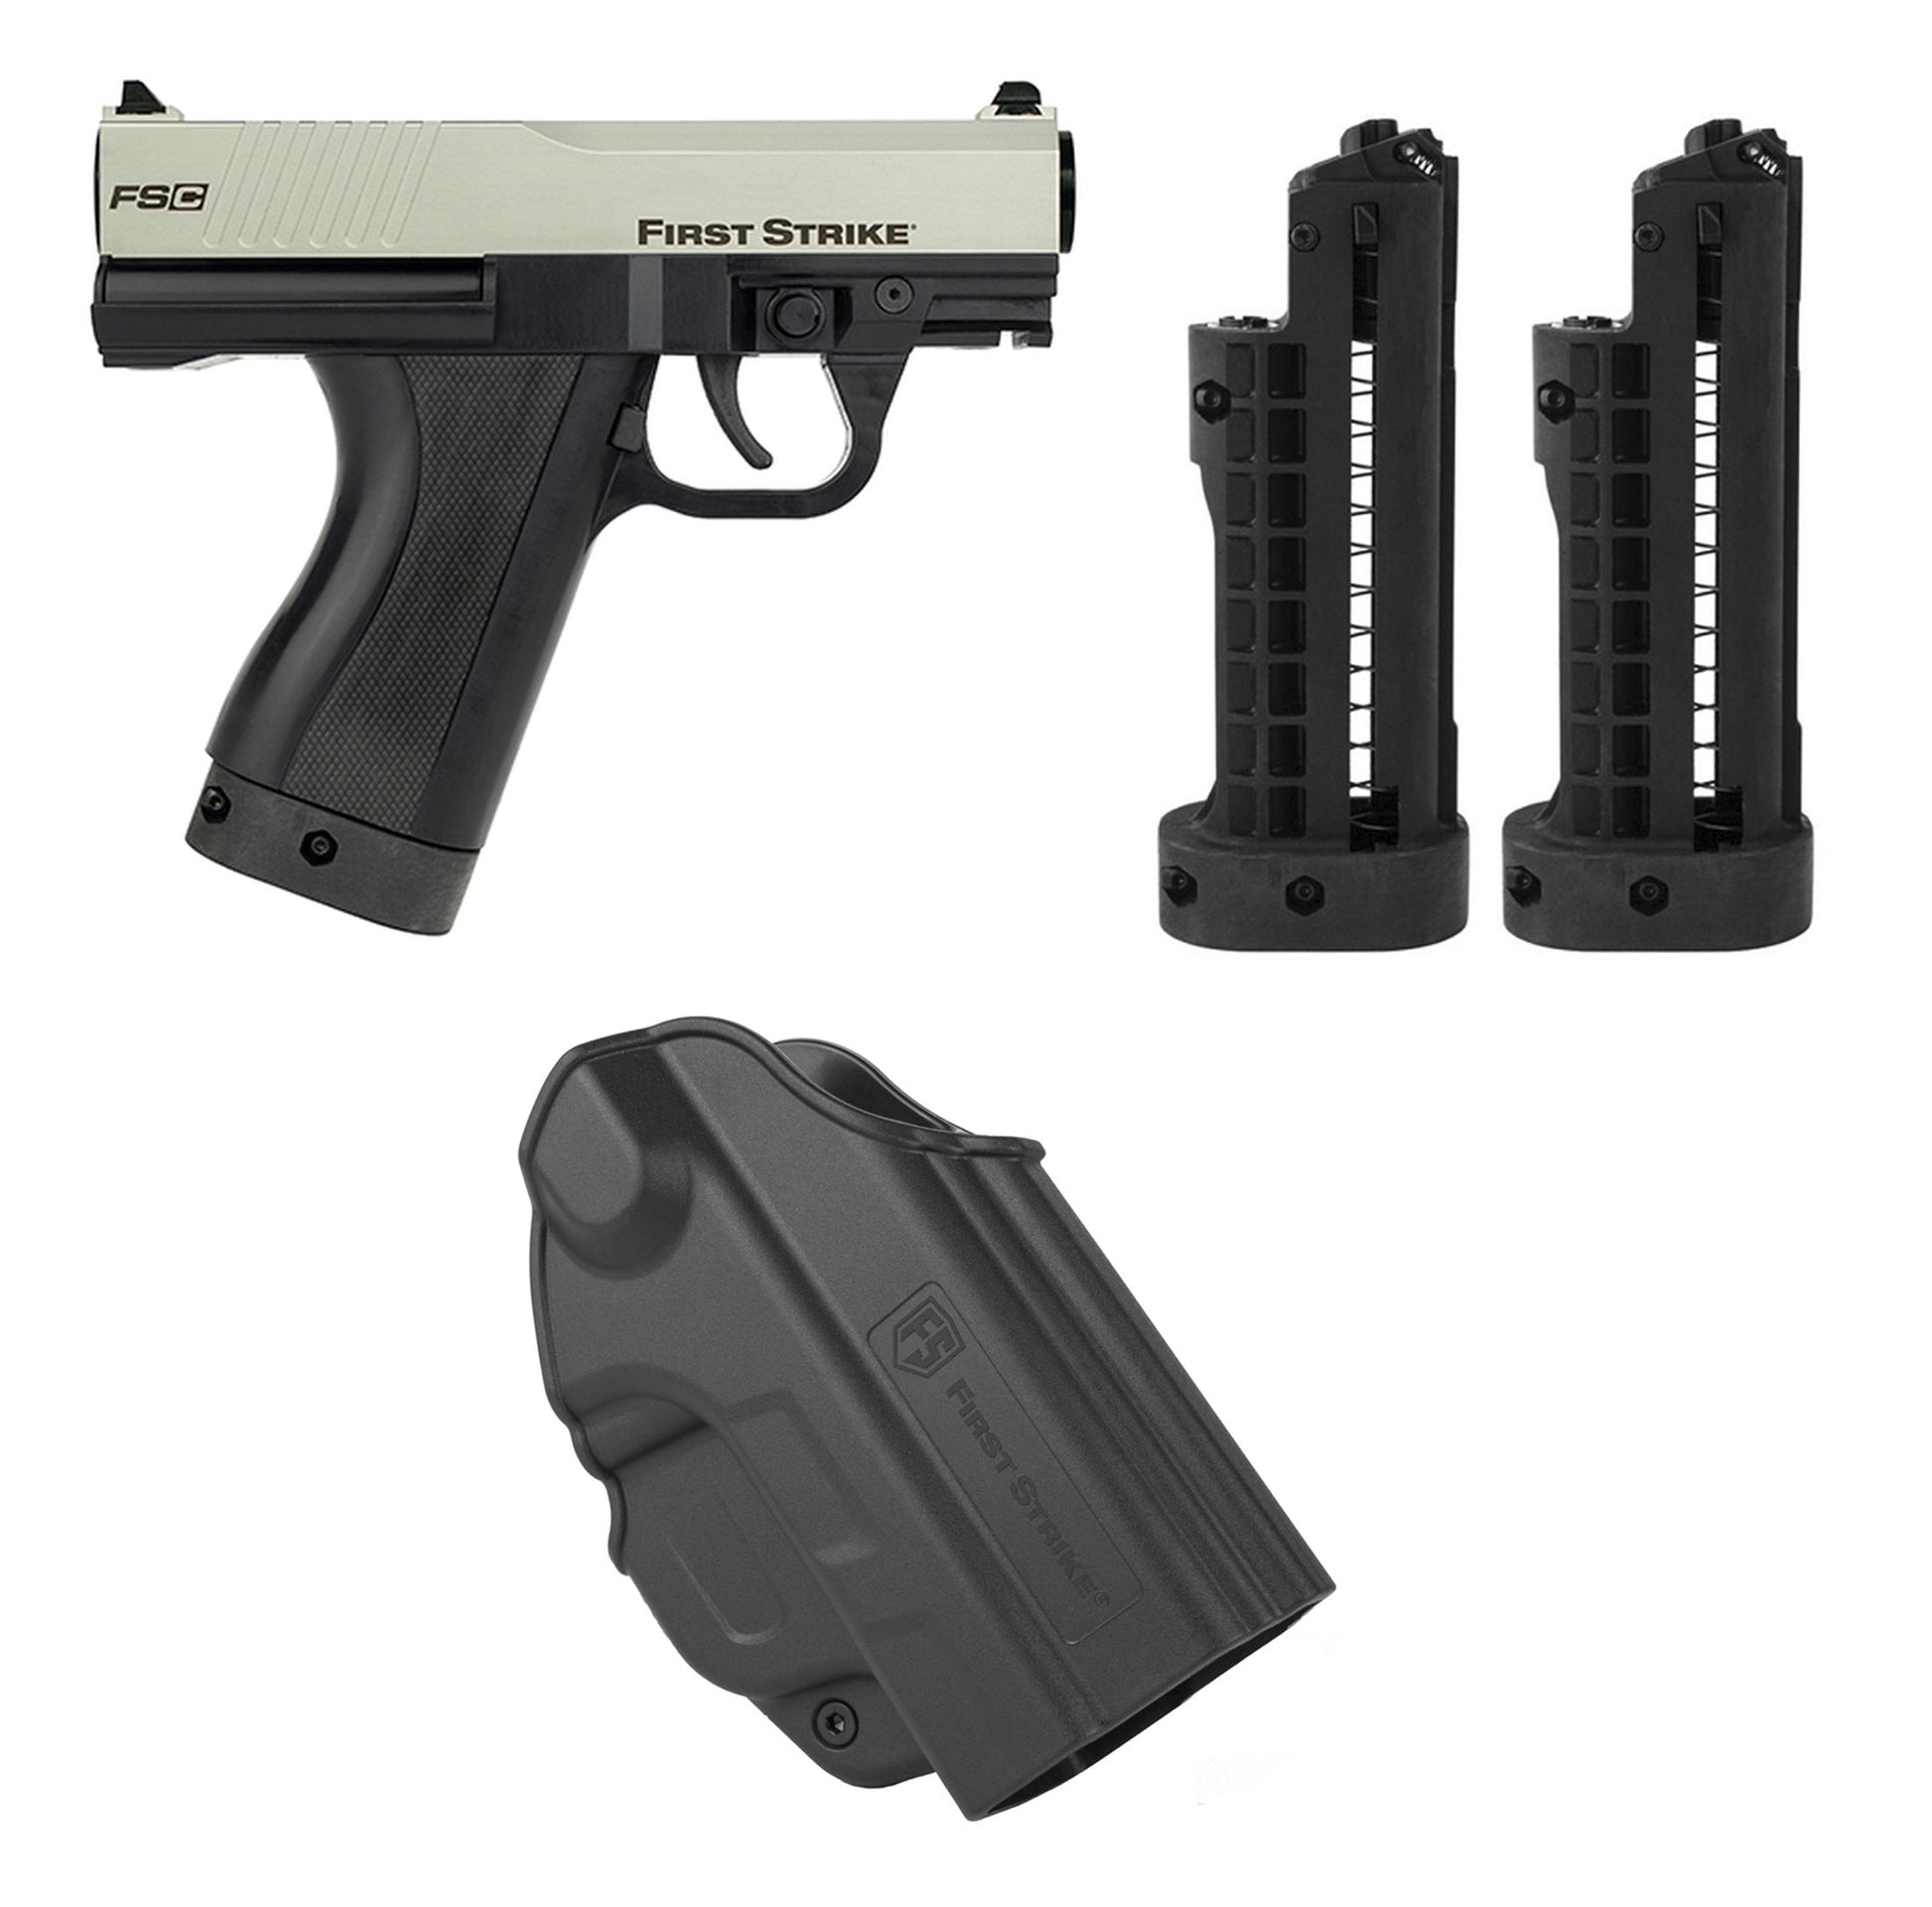 First Strike FSC (First Strike Compact) Paintball Pistol with Holster and 3 Mags - Silver/Black - First Strike